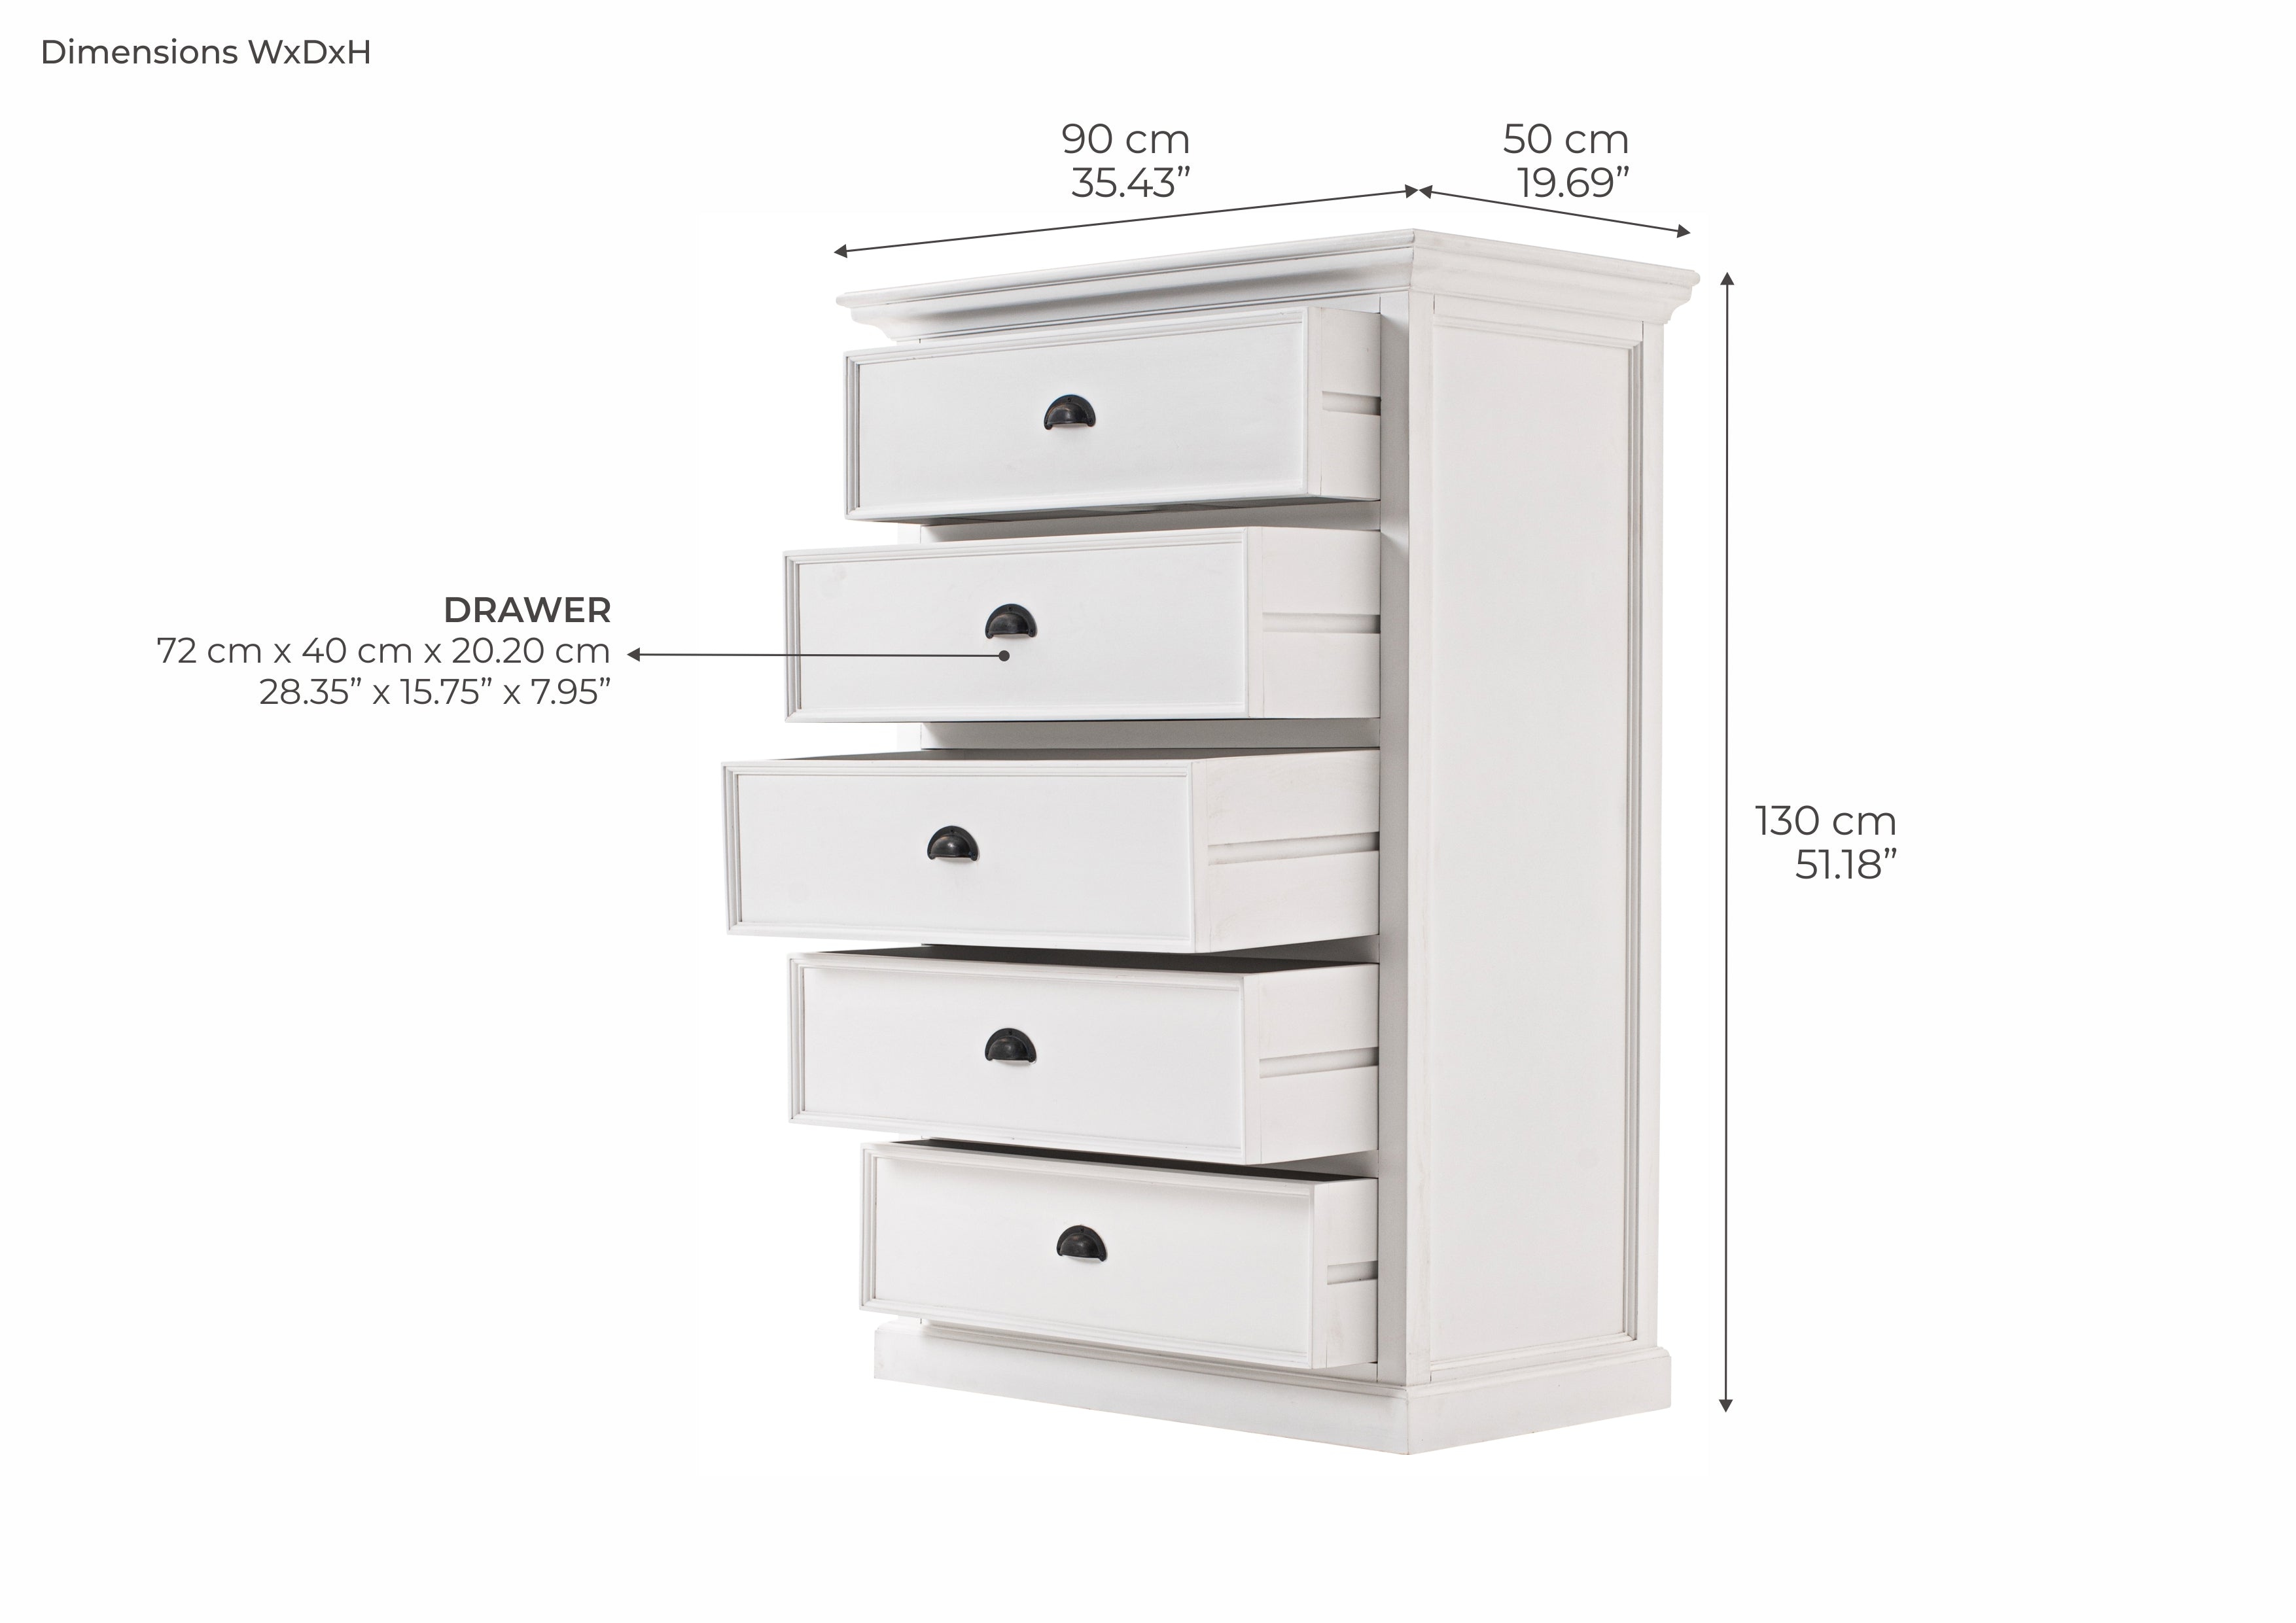 HALIFAX Chest of Drawers Dimensions